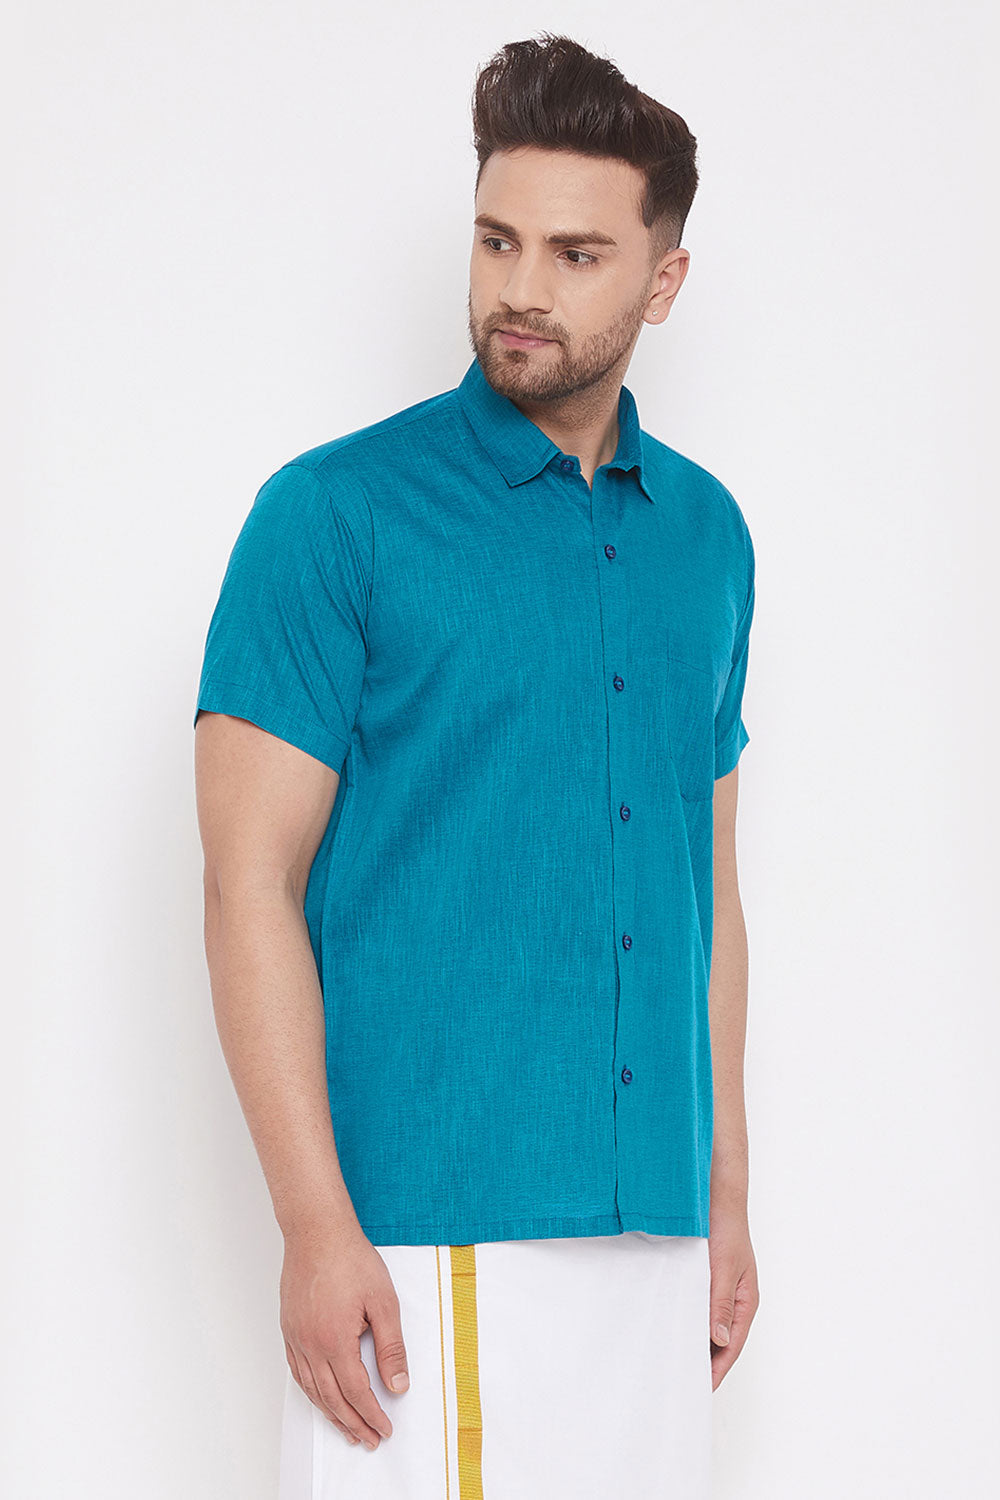 Blended Cotton Turquoise Solid Men's Shirt